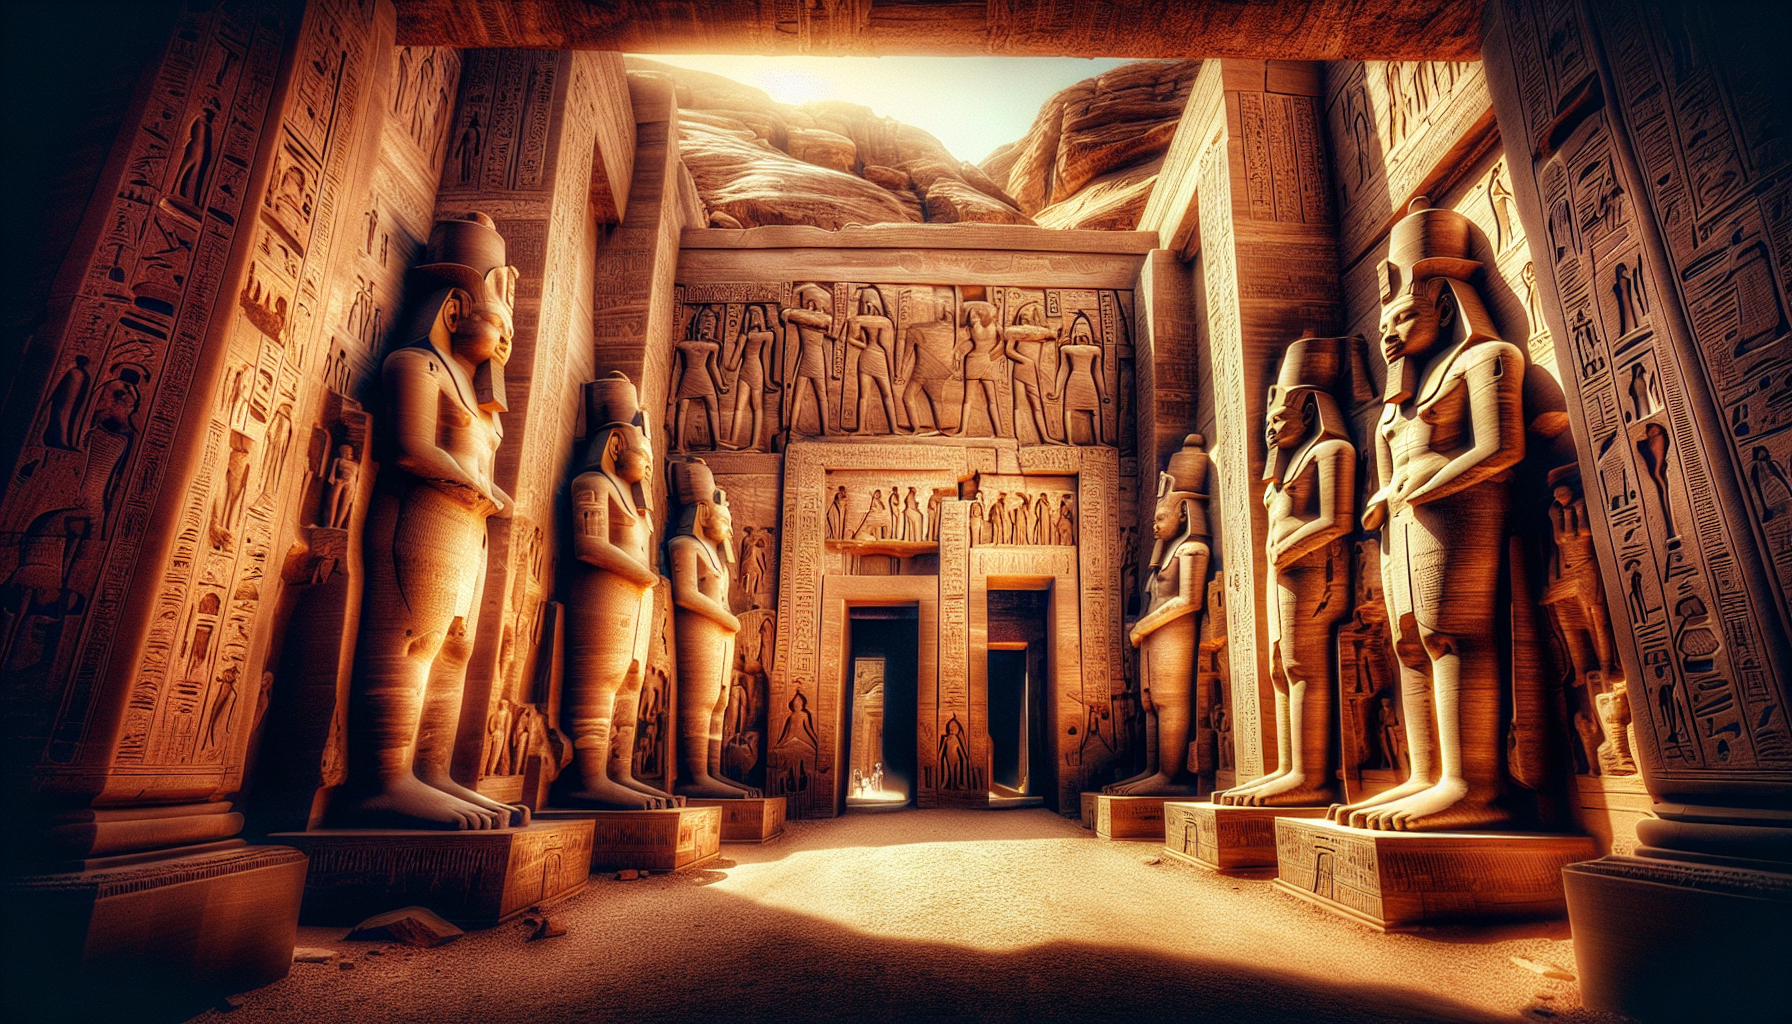 explore the magnificence of the sacred temples of abu simbel and discover if they deserve the title of the eighth wonder of the ancient world.